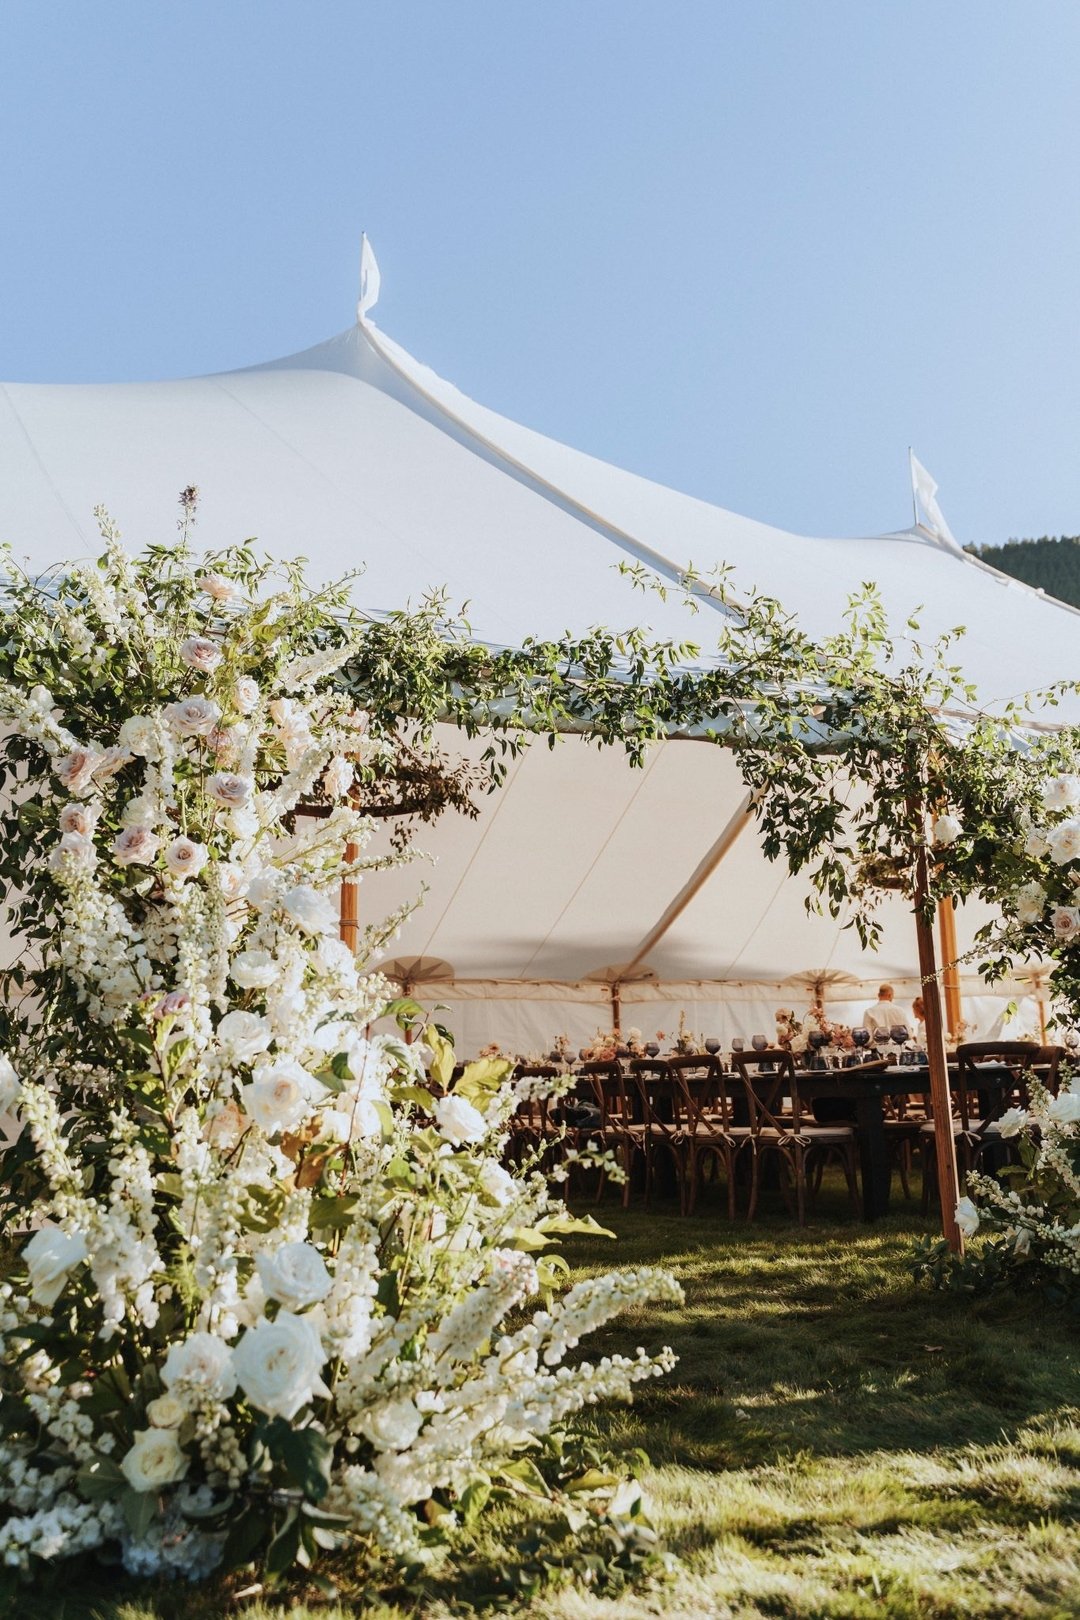 A little moment for this tent entrance!